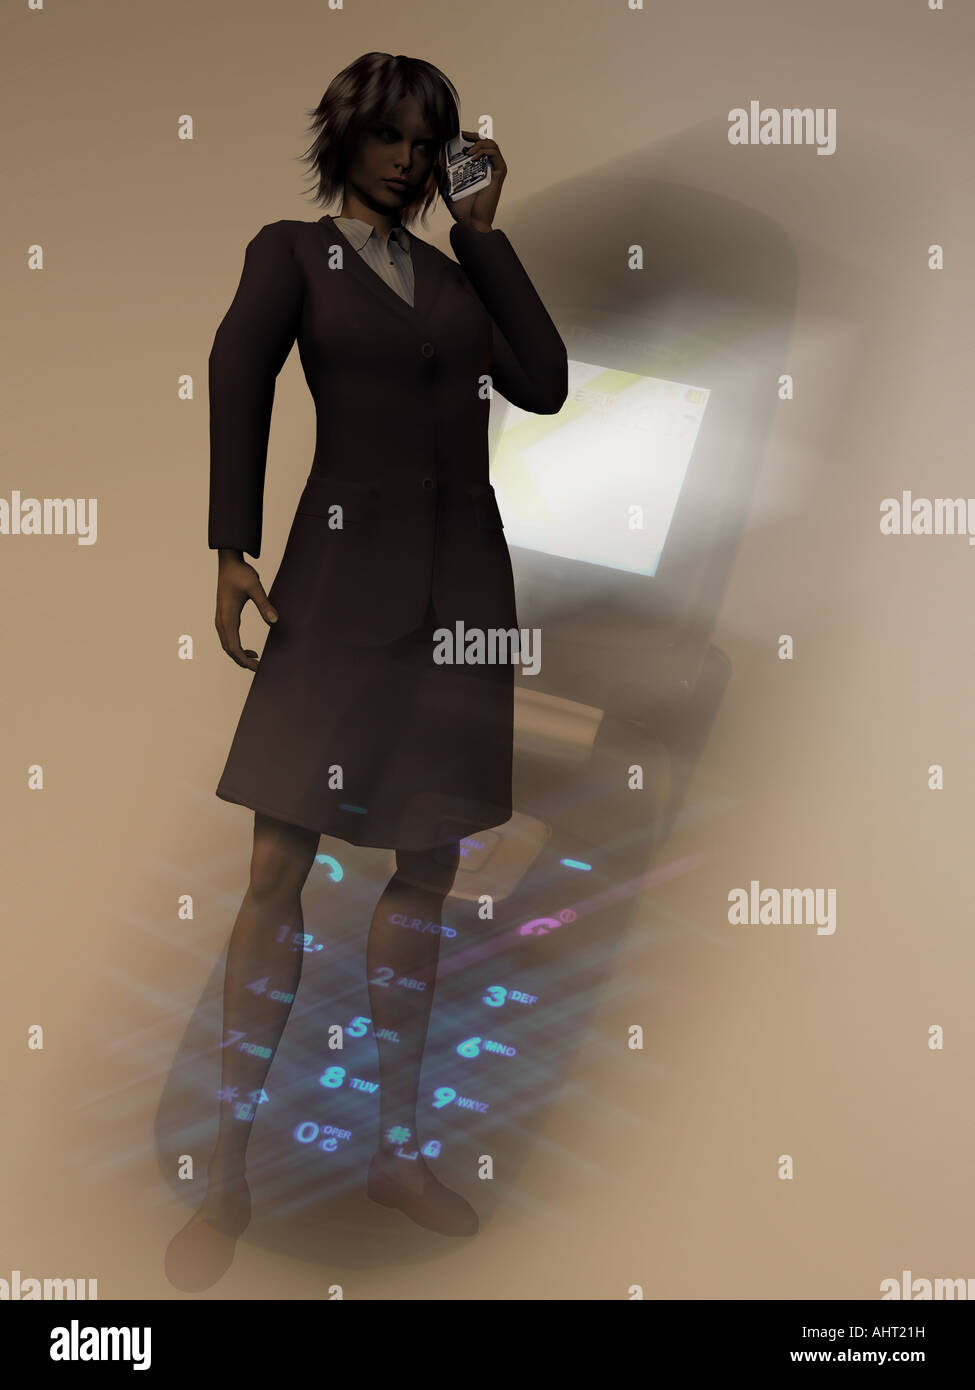 Businesswoman with cell phone Banque D'Images